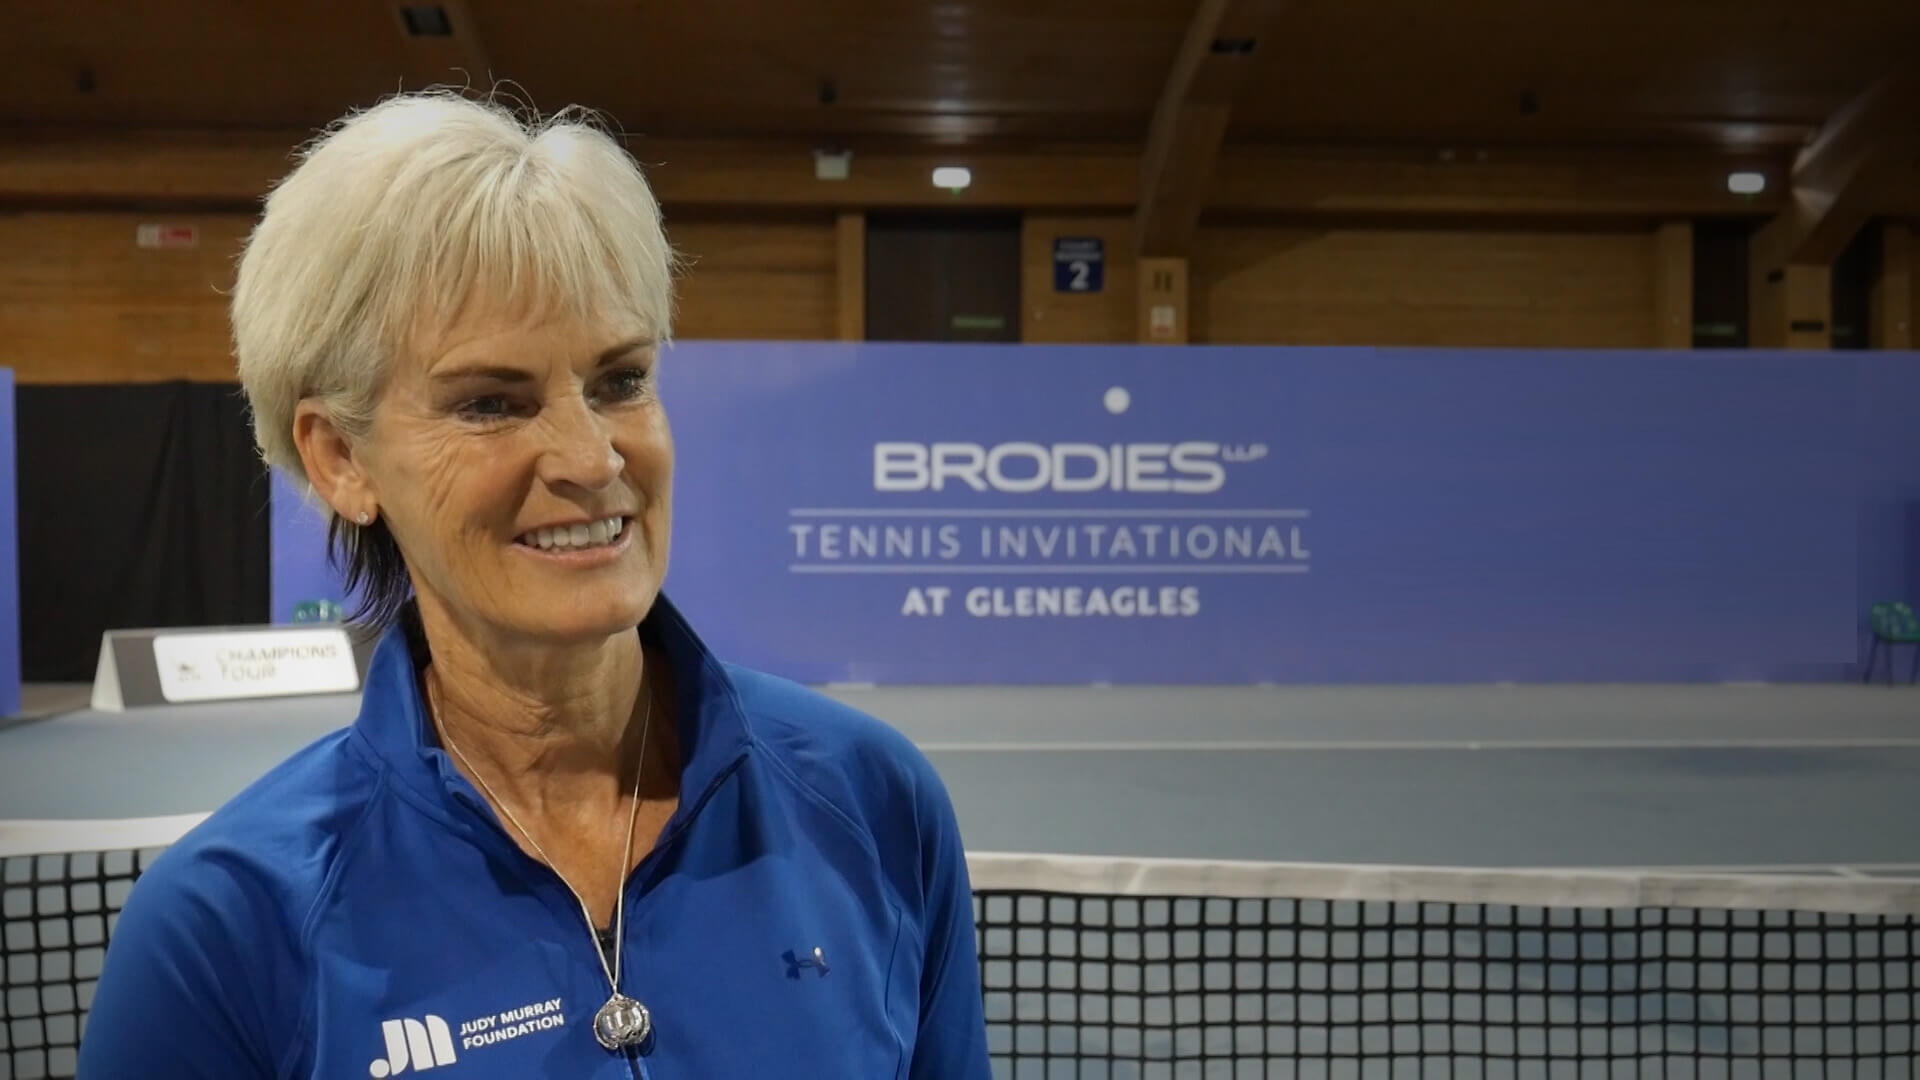 An example of "Brand Content" from Brodies LLP with Judy Murray.